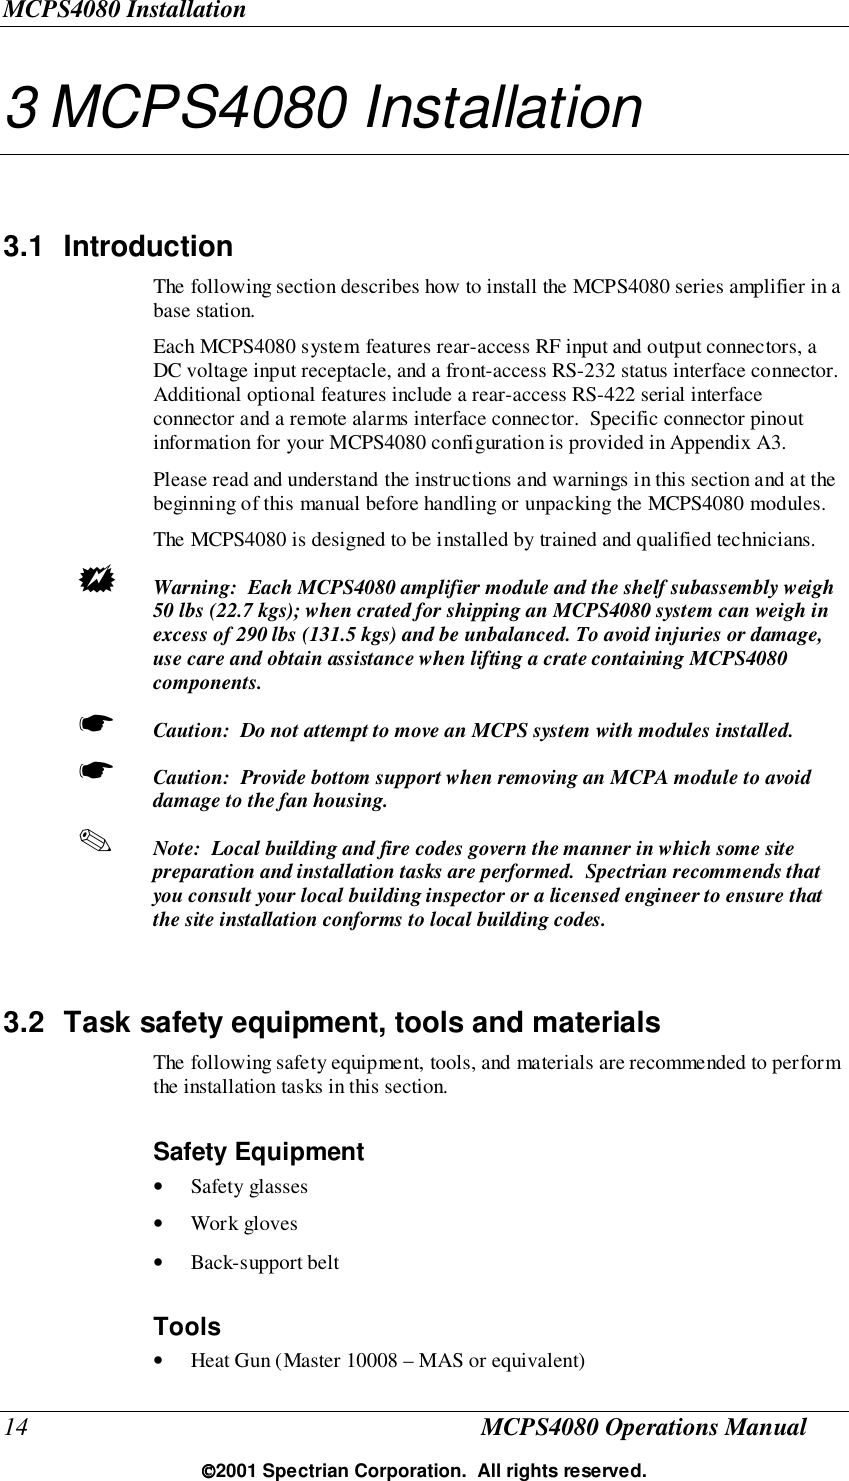 MCPS4080 Installation14 MCPS4080 Operations Manual2001 Spectrian Corporation.  All rights reserved.3 MCPS4080 Installation3.1 IntroductionThe following section describes how to install the MCPS4080 series amplifier in abase station.Each MCPS4080 system features rear-access RF input and output connectors, aDC voltage input receptacle, and a front-access RS-232 status interface connector.Additional optional features include a rear-access RS-422 serial interfaceconnector and a remote alarms interface connector.  Specific connector pinoutinformation for your MCPS4080 configuration is provided in Appendix A3.Please read and understand the instructions and warnings in this section and at thebeginning of this manual before handling or unpacking the MCPS4080 modules.The MCPS4080 is designed to be installed by trained and qualified technicians.! Warning:  Each MCPS4080 amplifier module and the shelf subassembly weigh50 lbs (22.7 kgs); when crated for shipping an MCPS4080 system can weigh inexcess of 290 lbs (131.5 kgs) and be unbalanced. To avoid injuries or damage,use care and obtain assistance when lifting a crate containing MCPS4080components.☛ Caution:  Do not attempt to move an MCPS system with modules installed.☛ Caution:  Provide bottom support when removing an MCPA module to avoiddamage to the fan housing.✎ Note:  Local building and fire codes govern the manner in which some sitepreparation and installation tasks are performed.  Spectrian recommends thatyou consult your local building inspector or a licensed engineer to ensure thatthe site installation conforms to local building codes.3.2  Task safety equipment, tools and materialsThe following safety equipment, tools, and materials are recommended to performthe installation tasks in this section.Safety Equipment• Safety glasses• Work gloves• Back-support beltTools• Heat Gun (Master 10008 – MAS or equivalent)